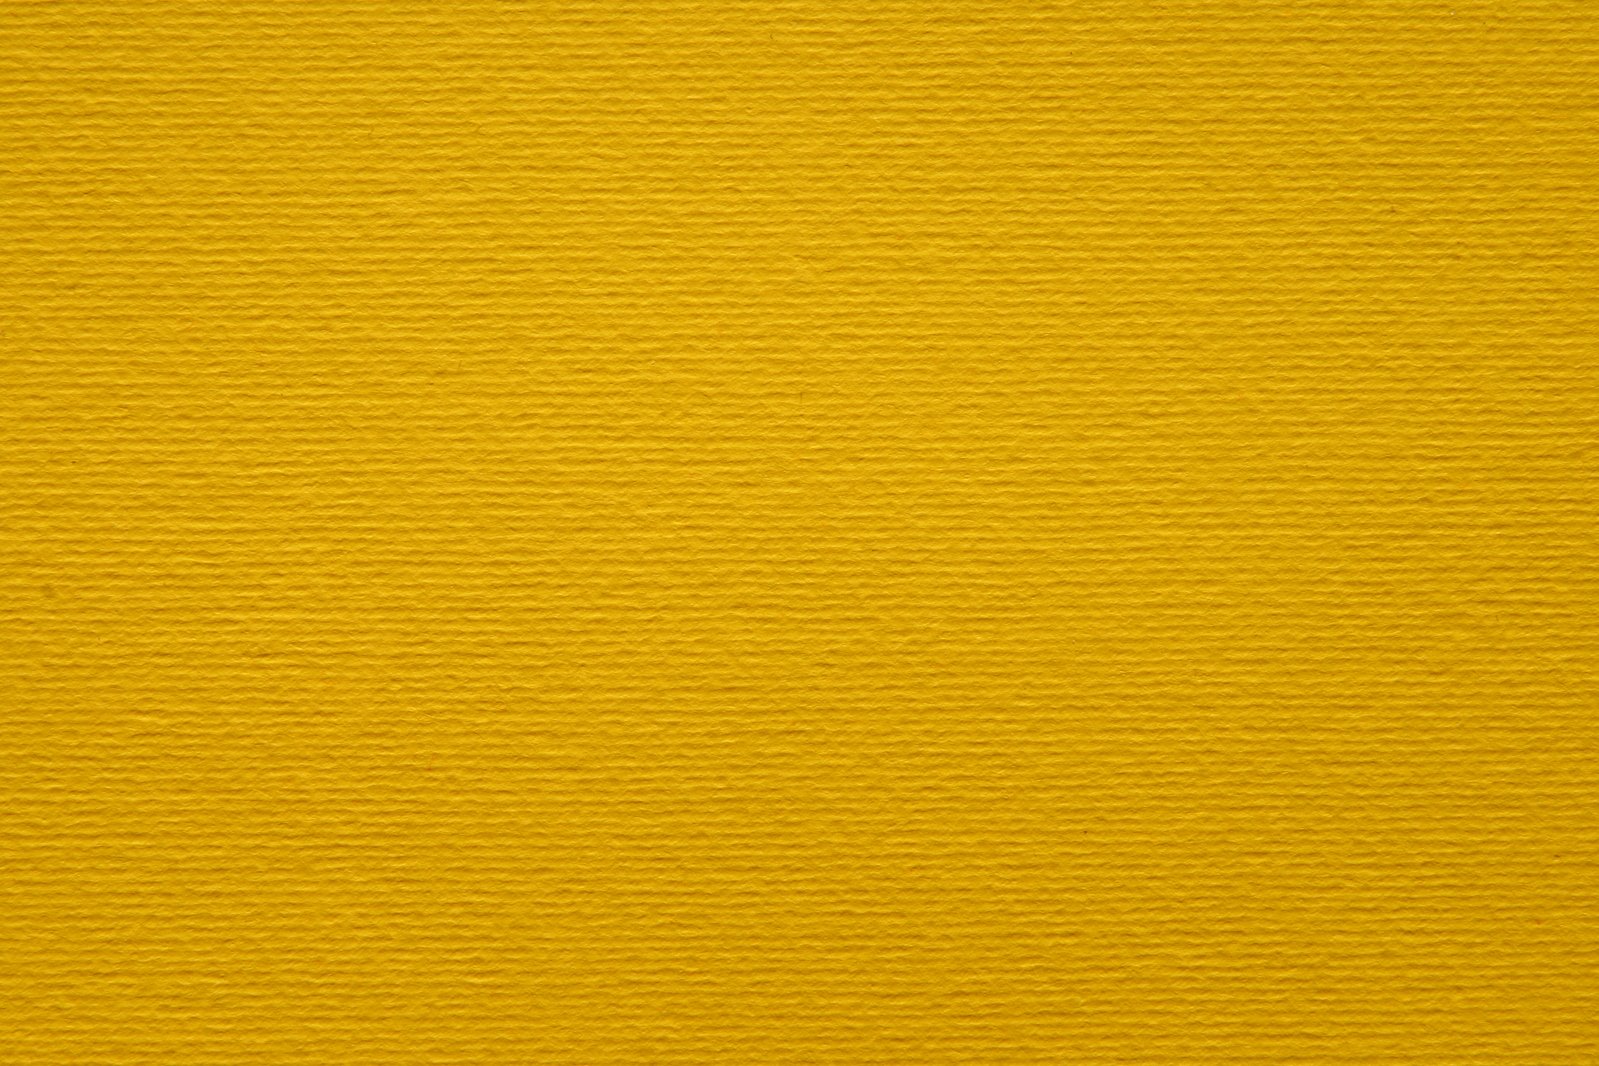 a yellow background or textured fabric with ridges